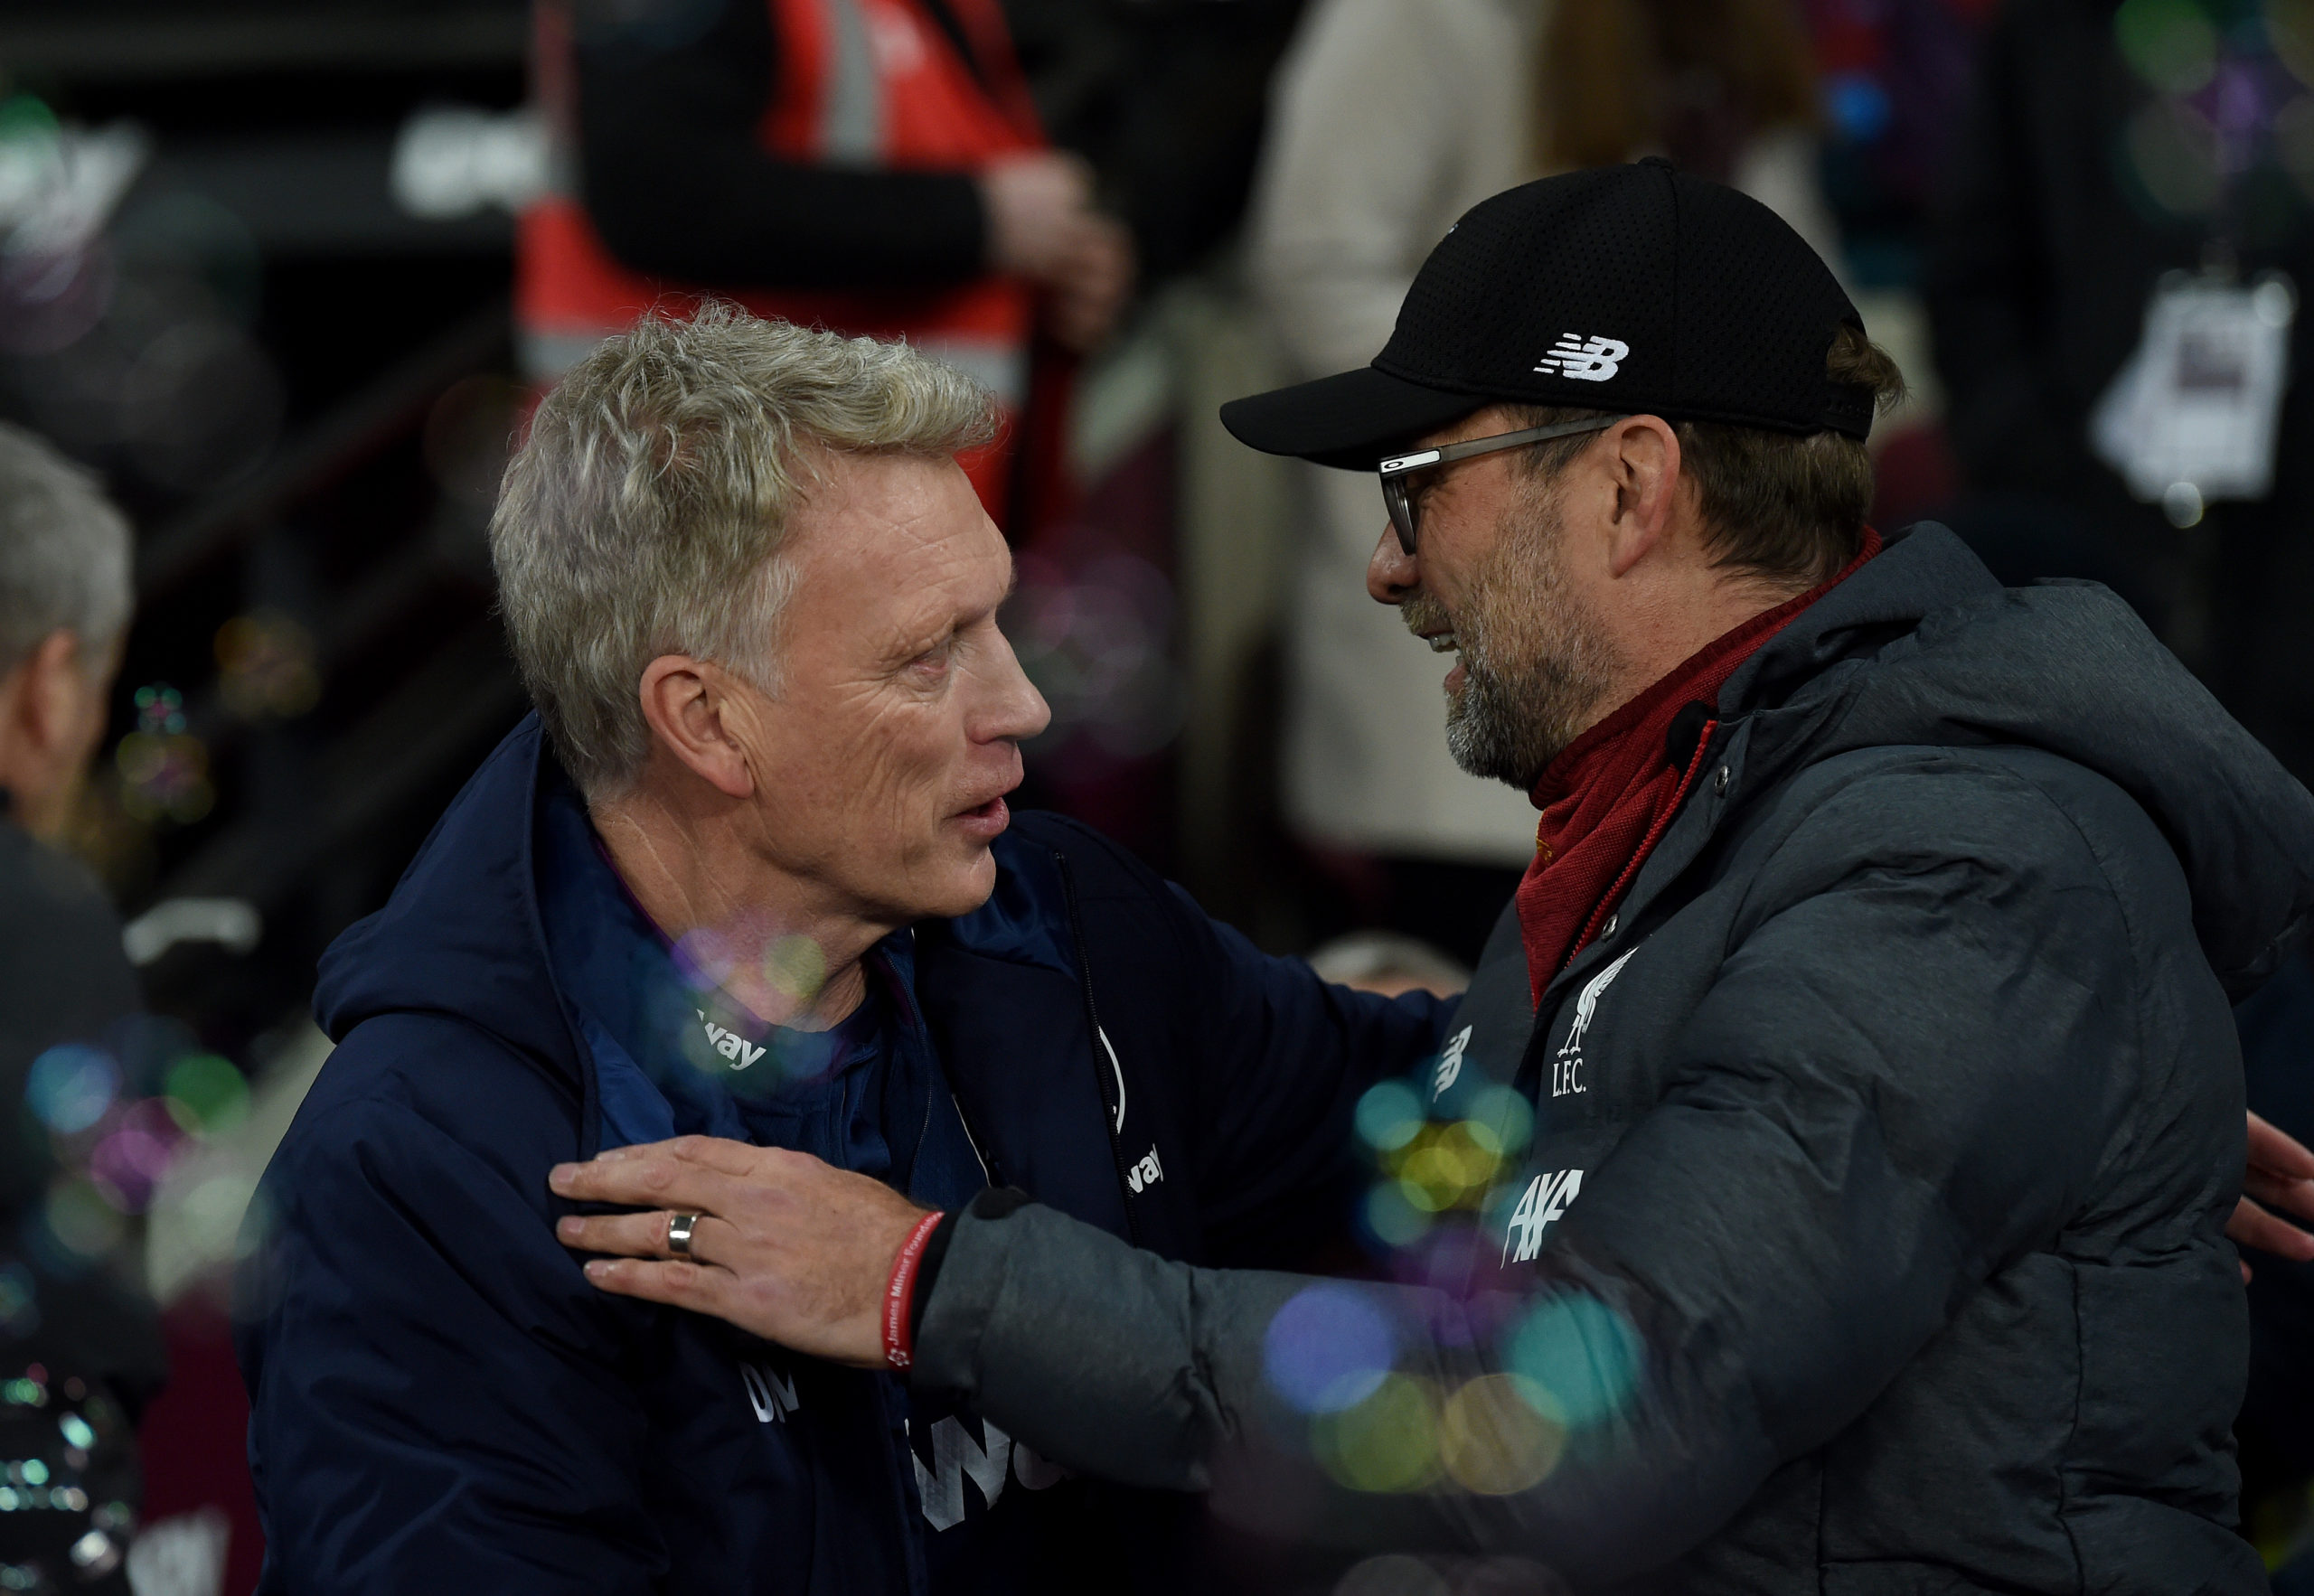 After pally pre-match chats Jurgen Klopp will be furious with what West Ham boss David Moyes is planning to do to Liverpool